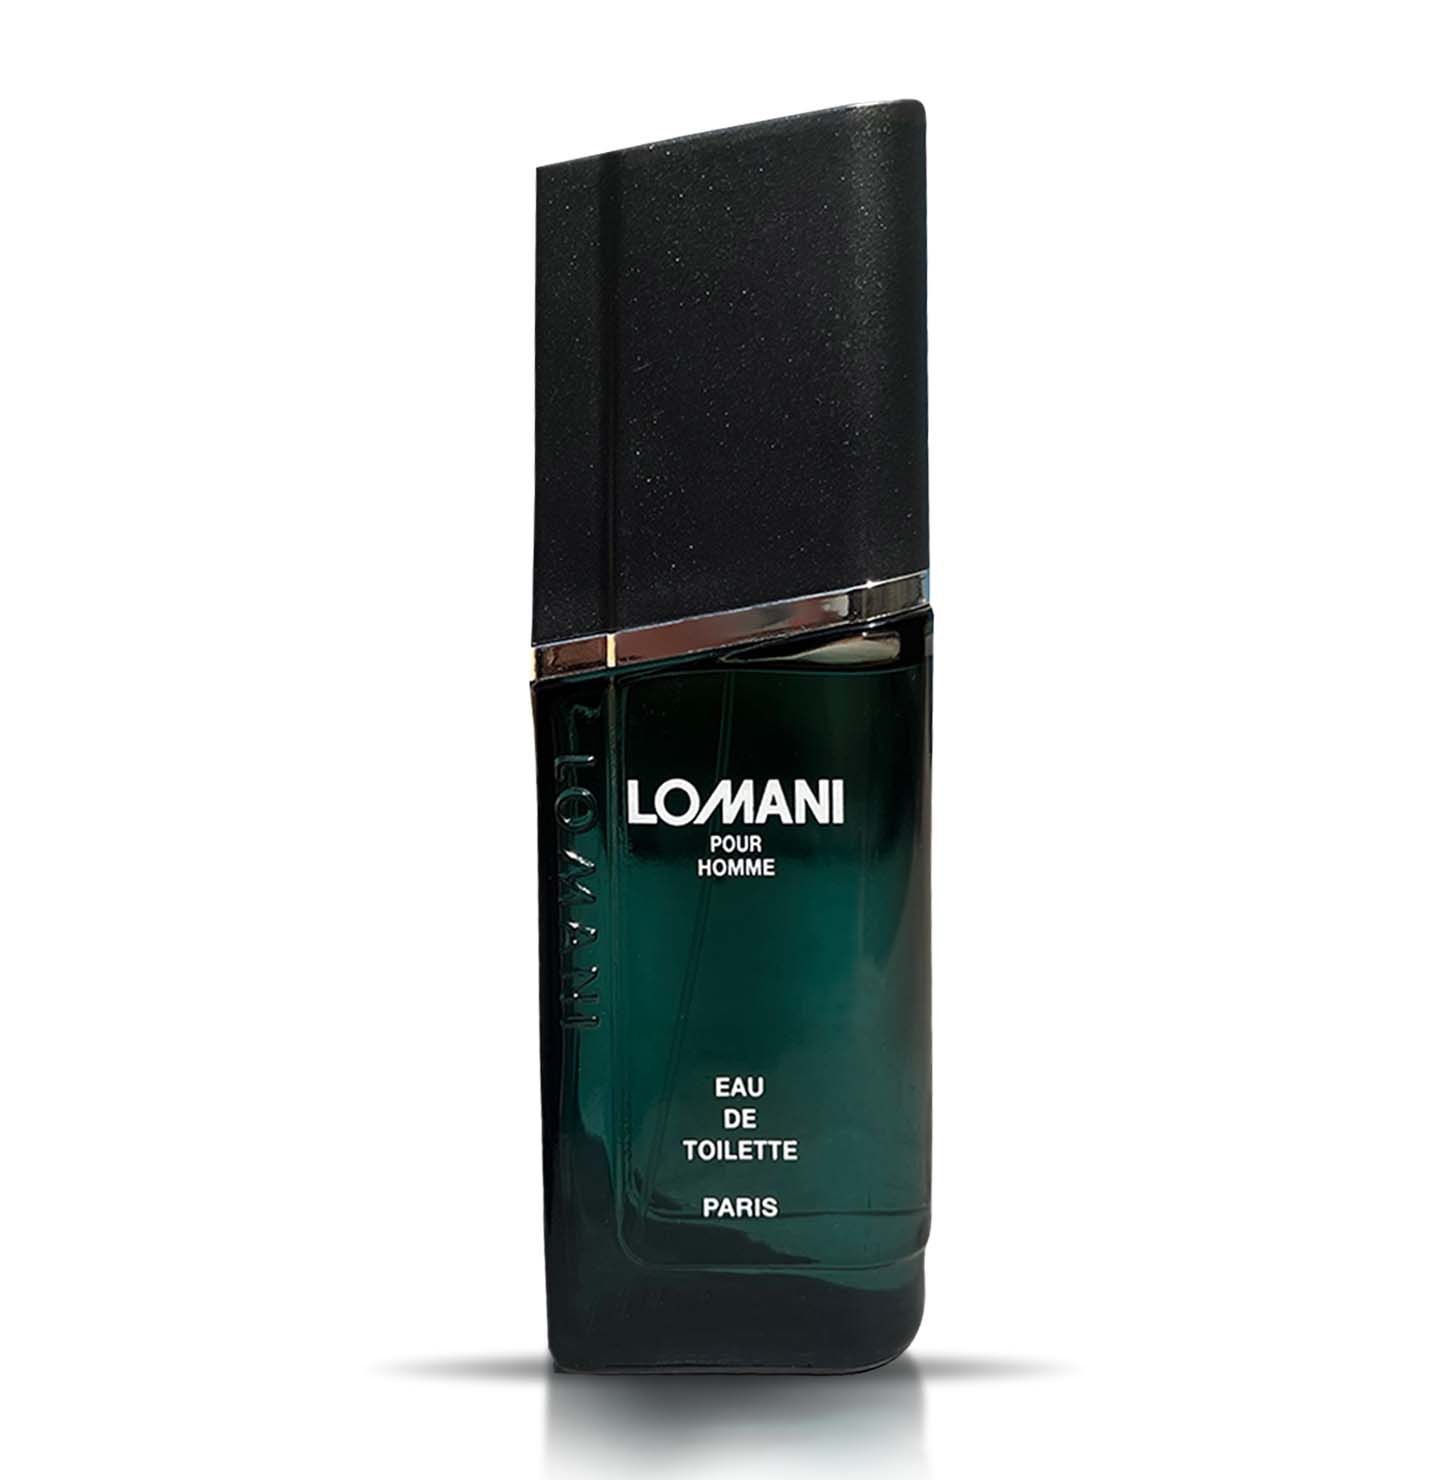 Lomani Pour Homme EDT | In-depth Review | Rs.700 only | Budget Fragrance  for students | Must Watch! - YouTube